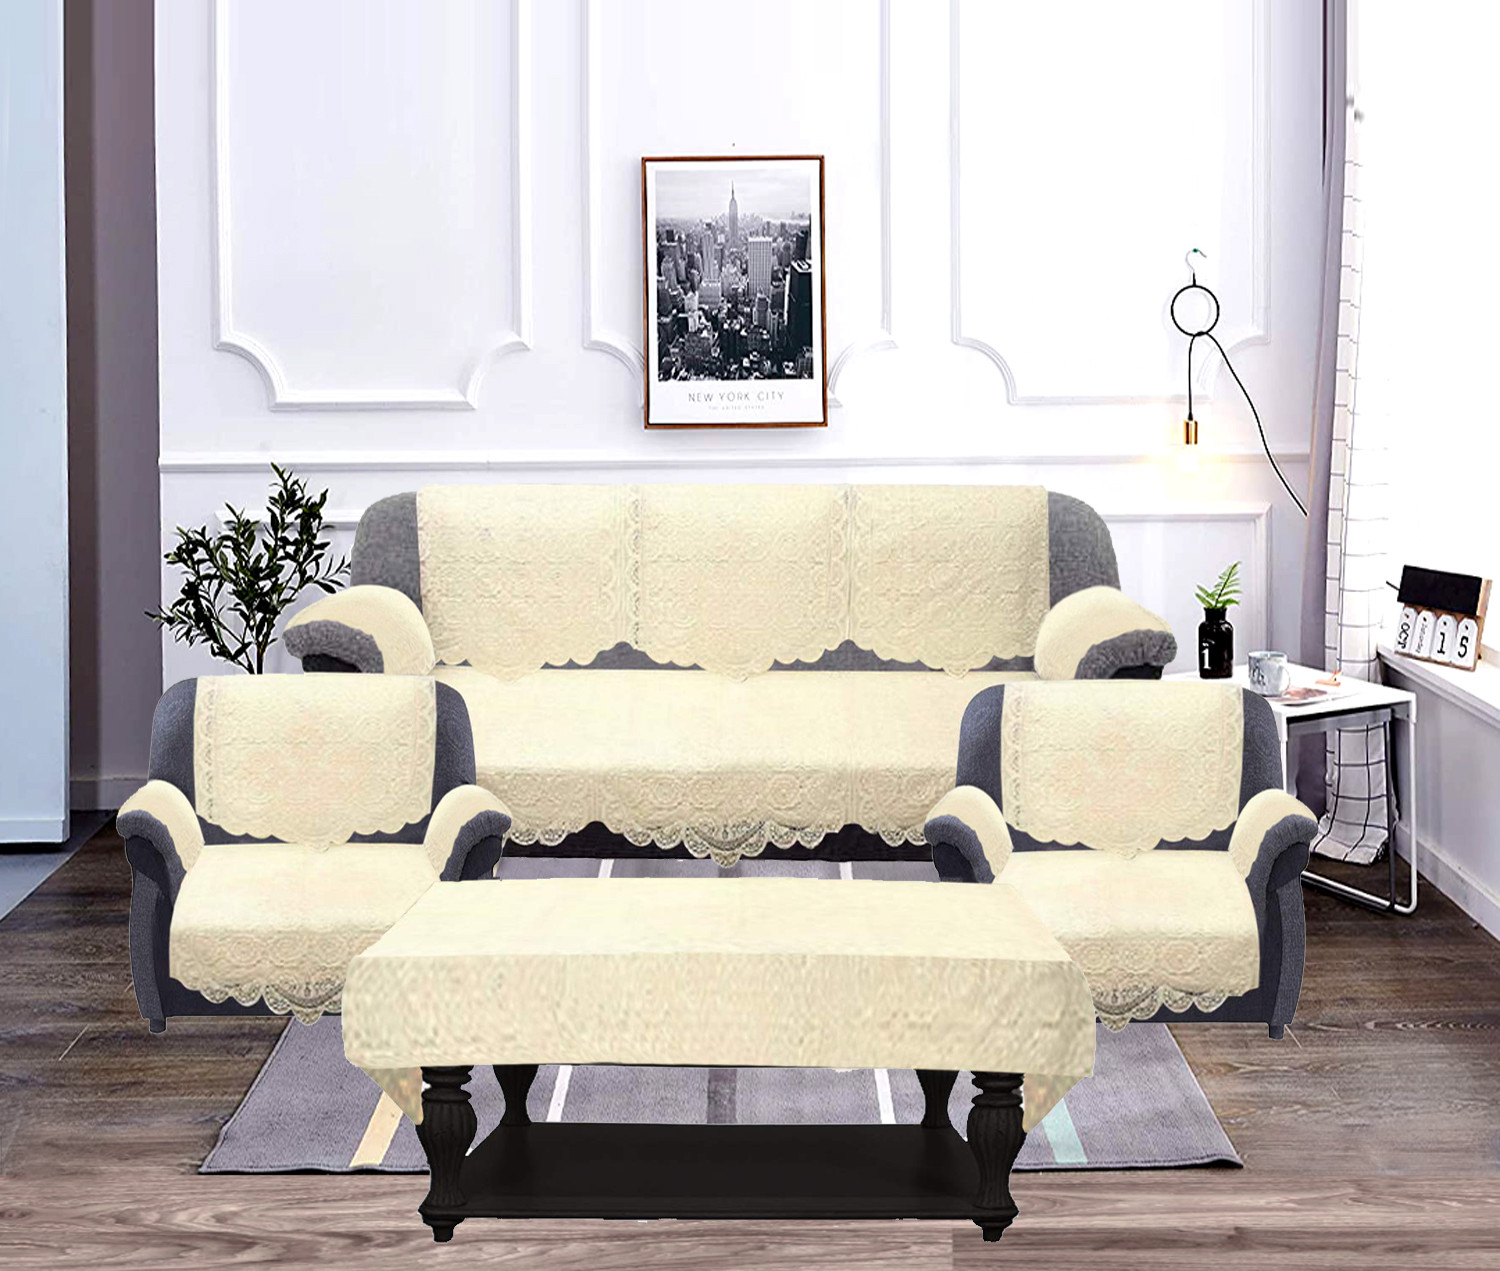 Kuber Industries Square Design Cotton 5 Seater Sofa Cover With 6 Pieces Arms cover And 1 Center Table Cover Use Both Side, Living Room, Drawing Room, Bedroom, Guest Room (Set Of17, Cream)-KUBMRT12005